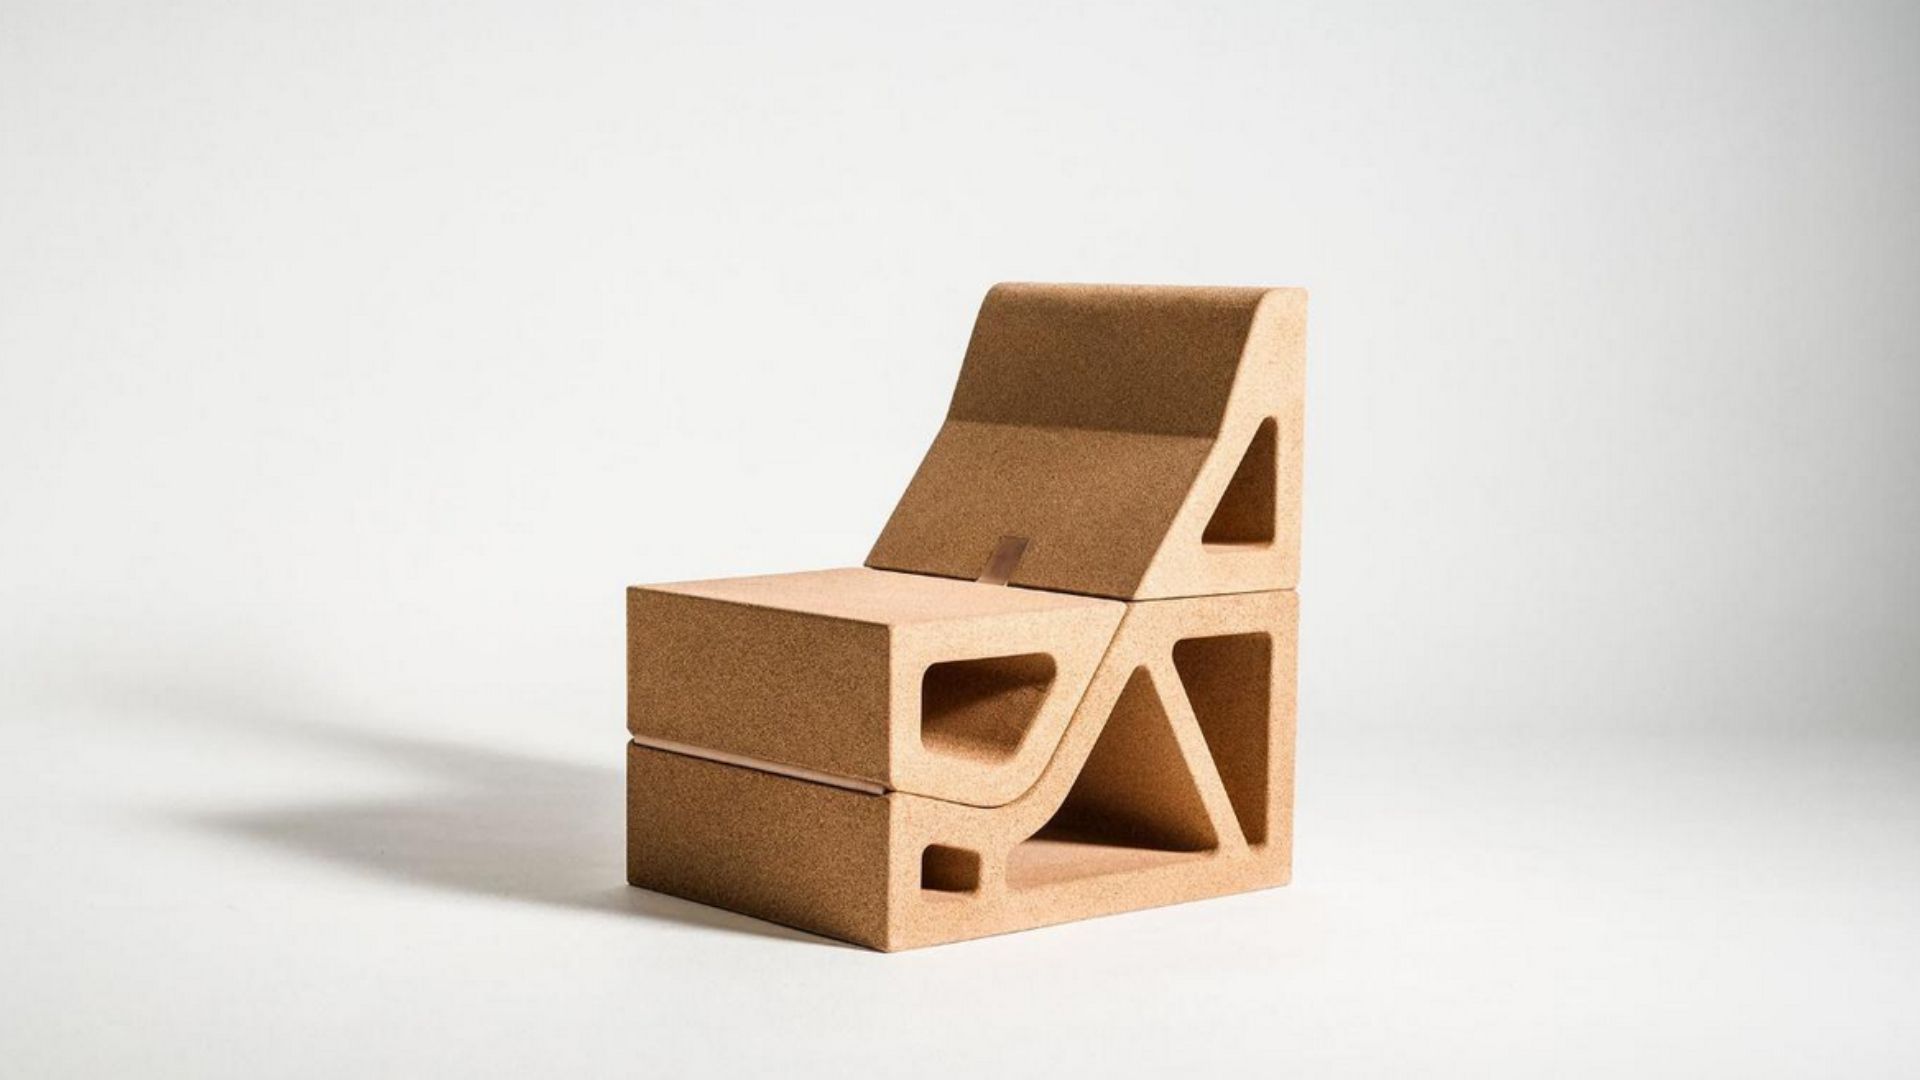 Tumble _ 4 minimalistic cork furniture to soften your space - Cover